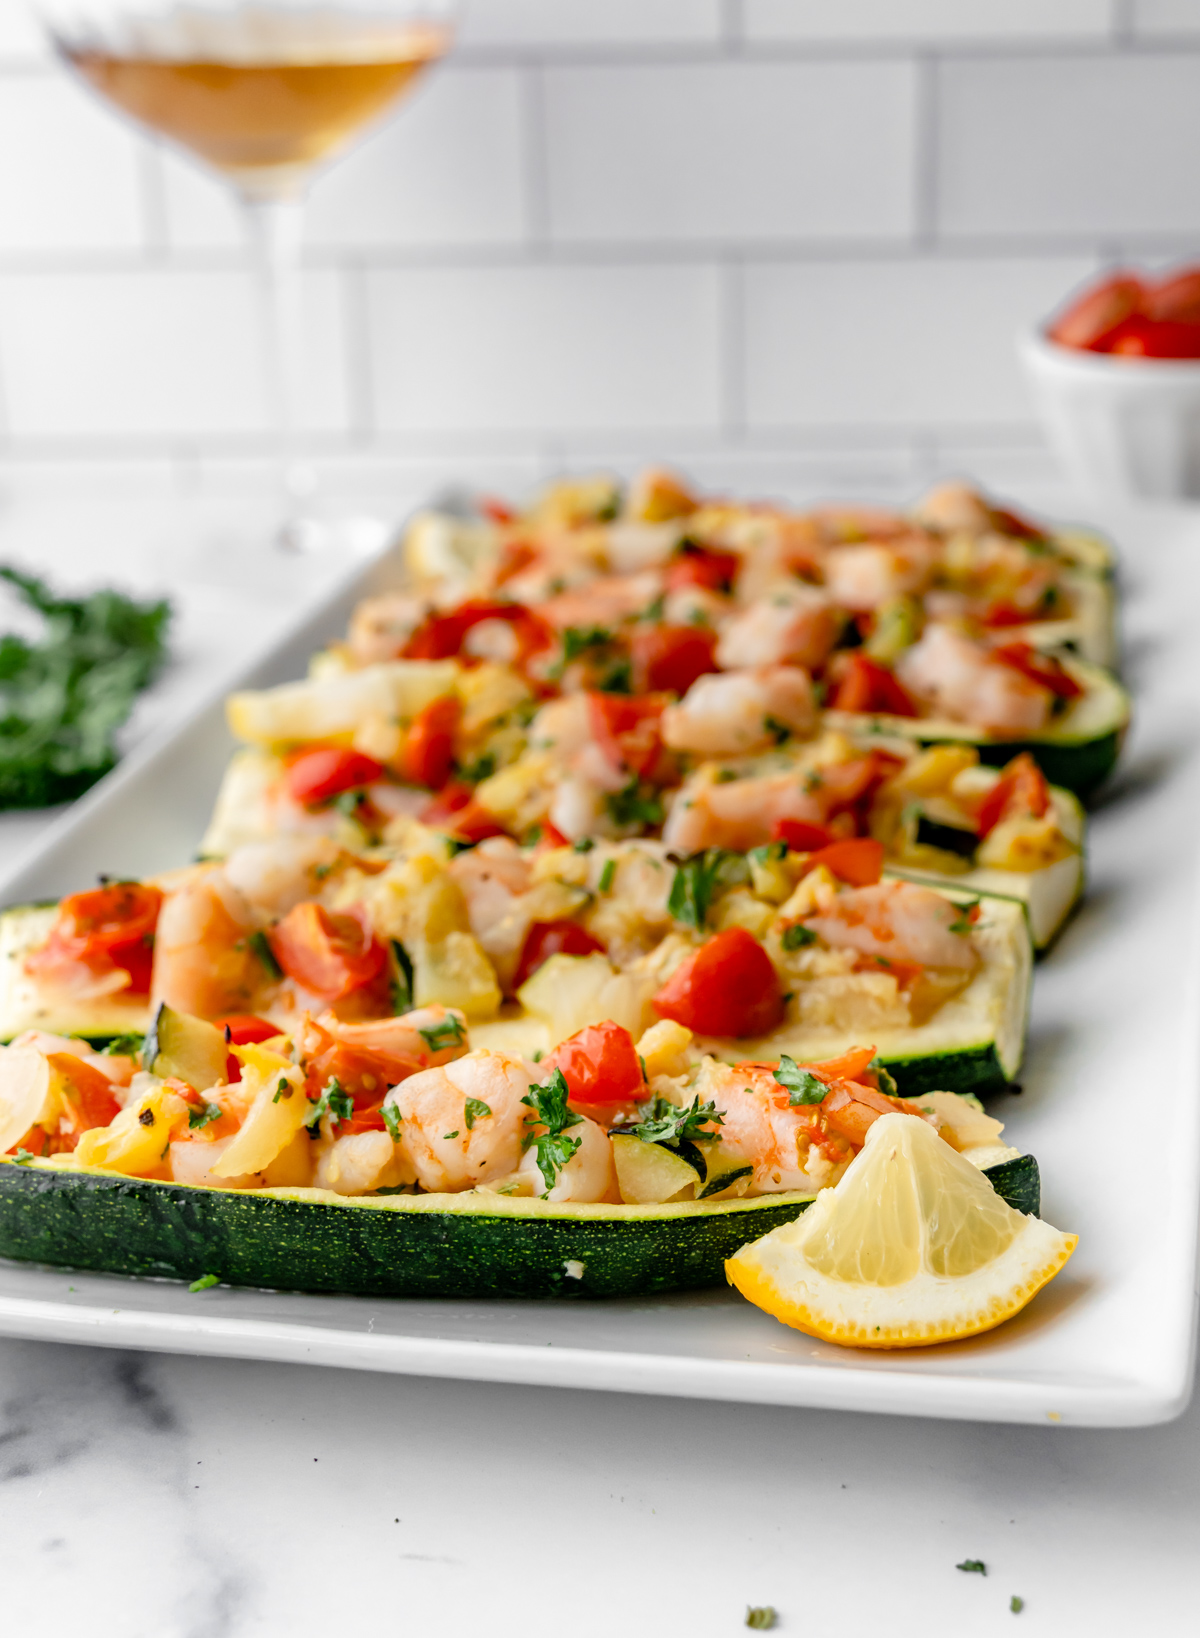 Angled view of shrimp stuffed zucchini boats with a lemon wedge and glass of wine in the back.